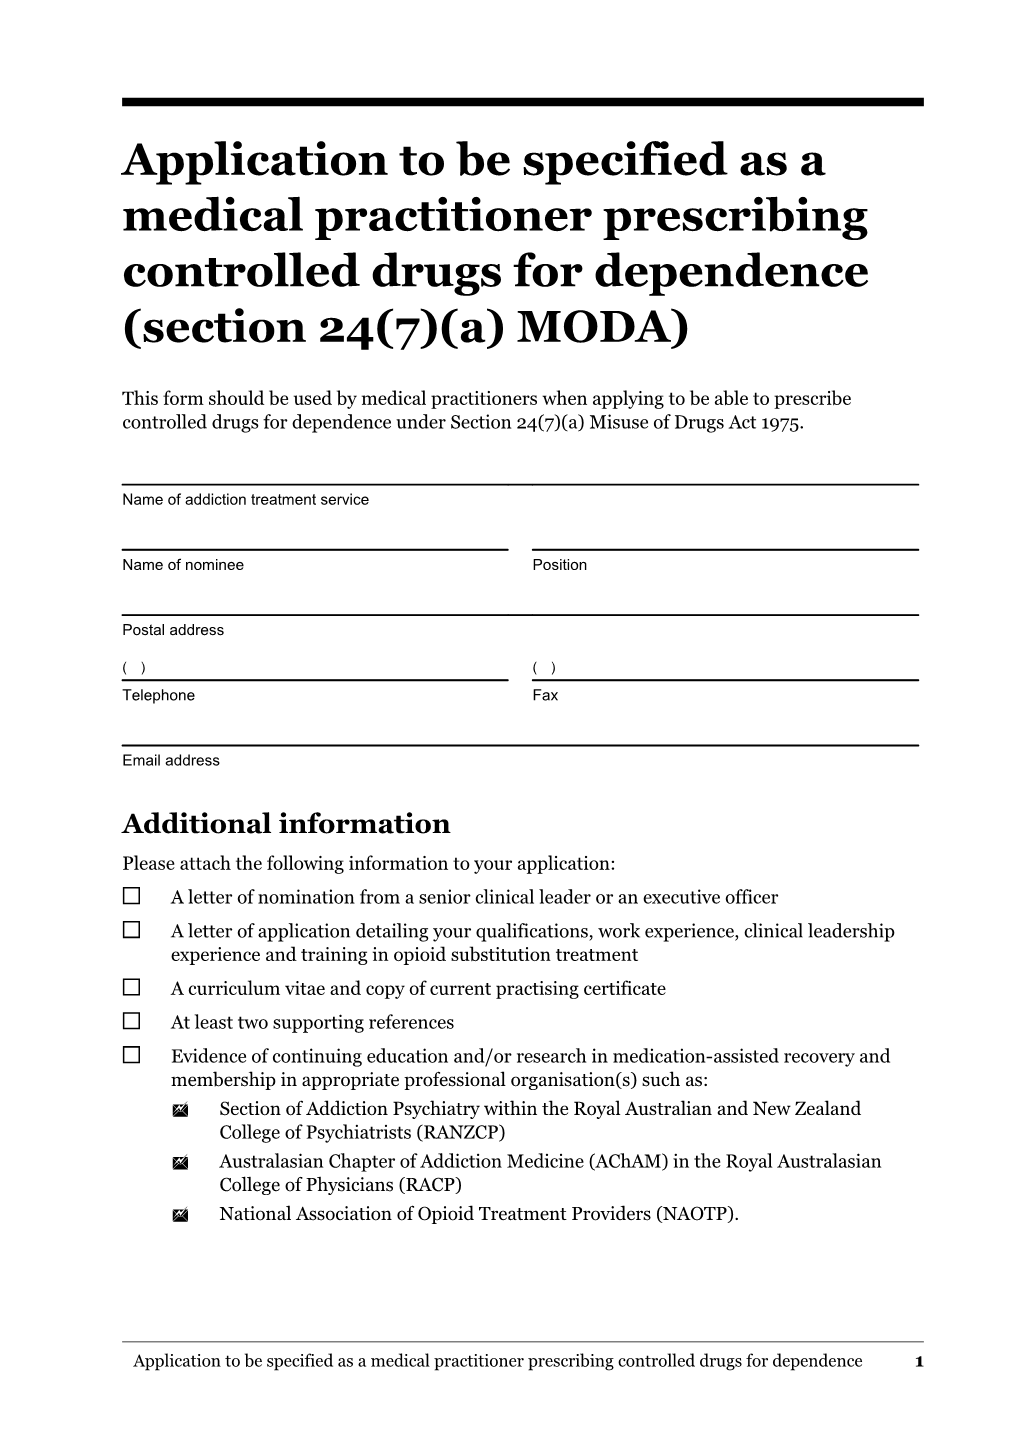 Application to Be Specified As a Medical Practitioner Prescribing Controlled Drugs For